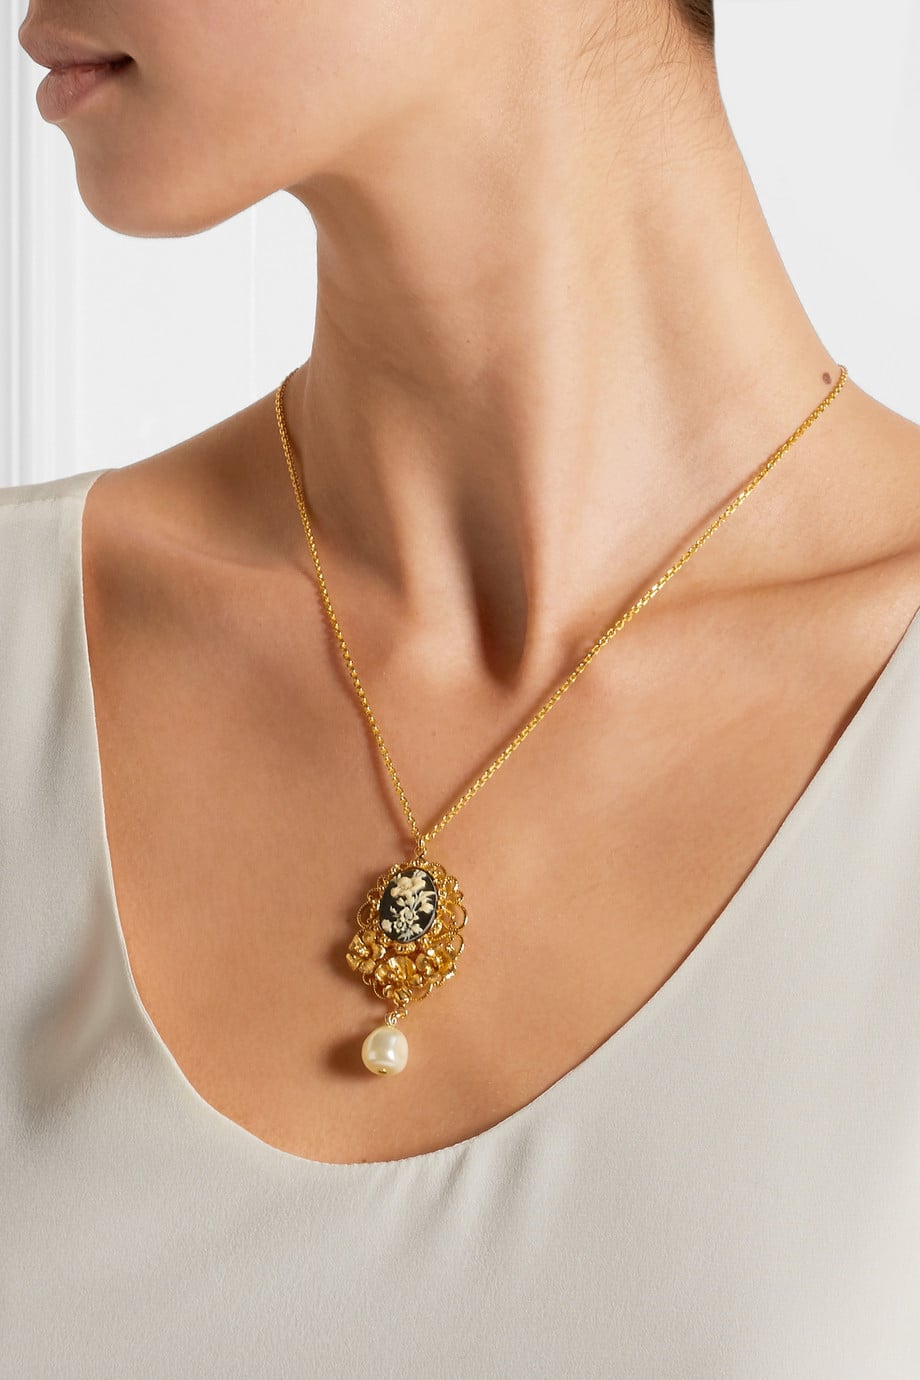 ny2016-gift-dolceandgabbana-cameo-gold-plated-and-resin-necklace